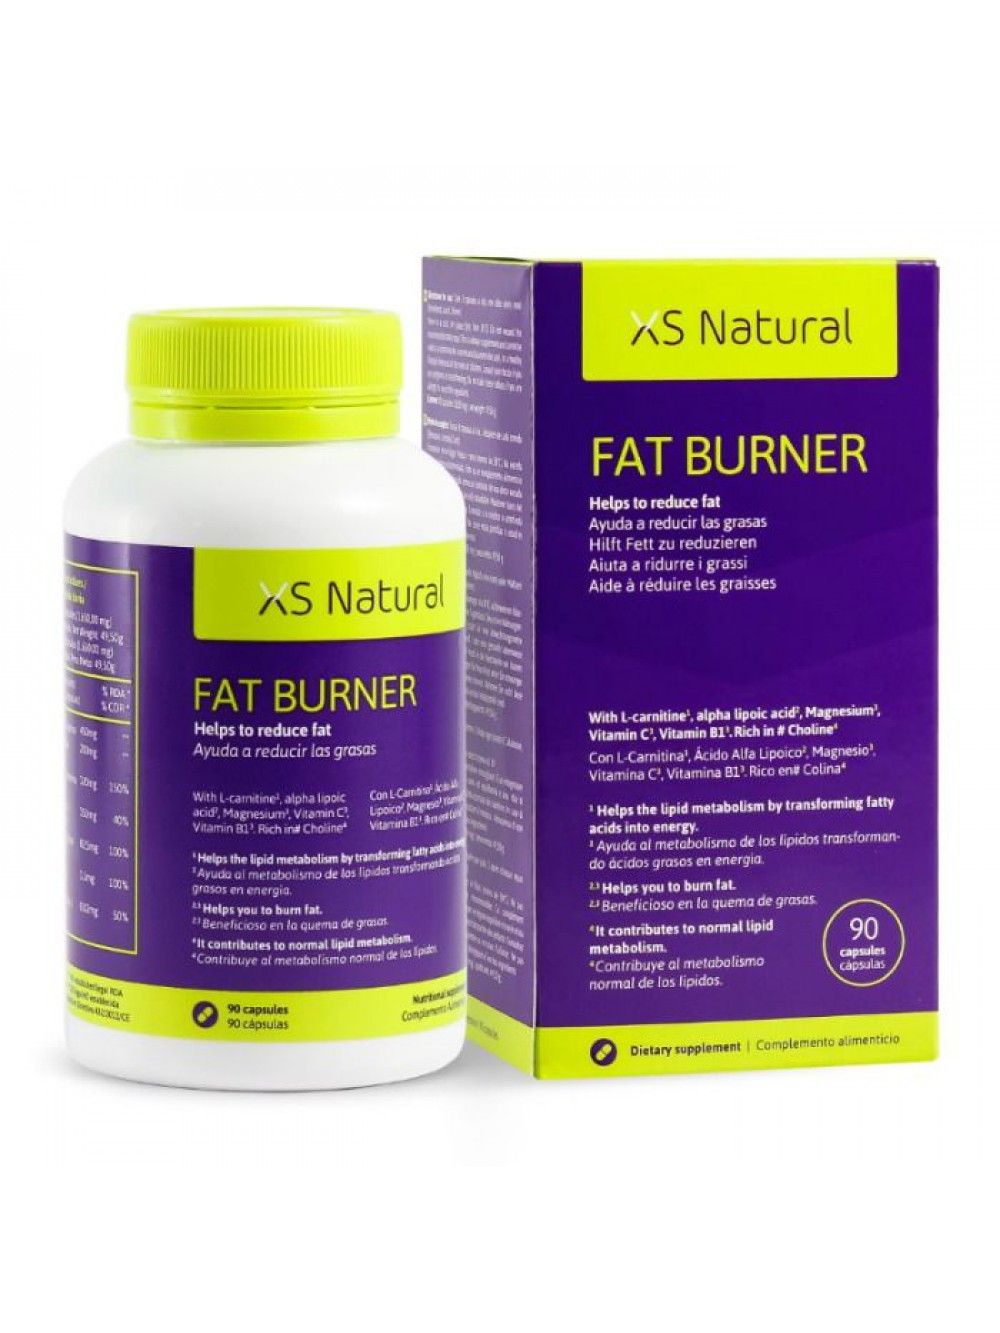 XS NATURAL FAT BURNER FAT BURNING WEIGHT LOST SUPPLEMENT 8437012718777